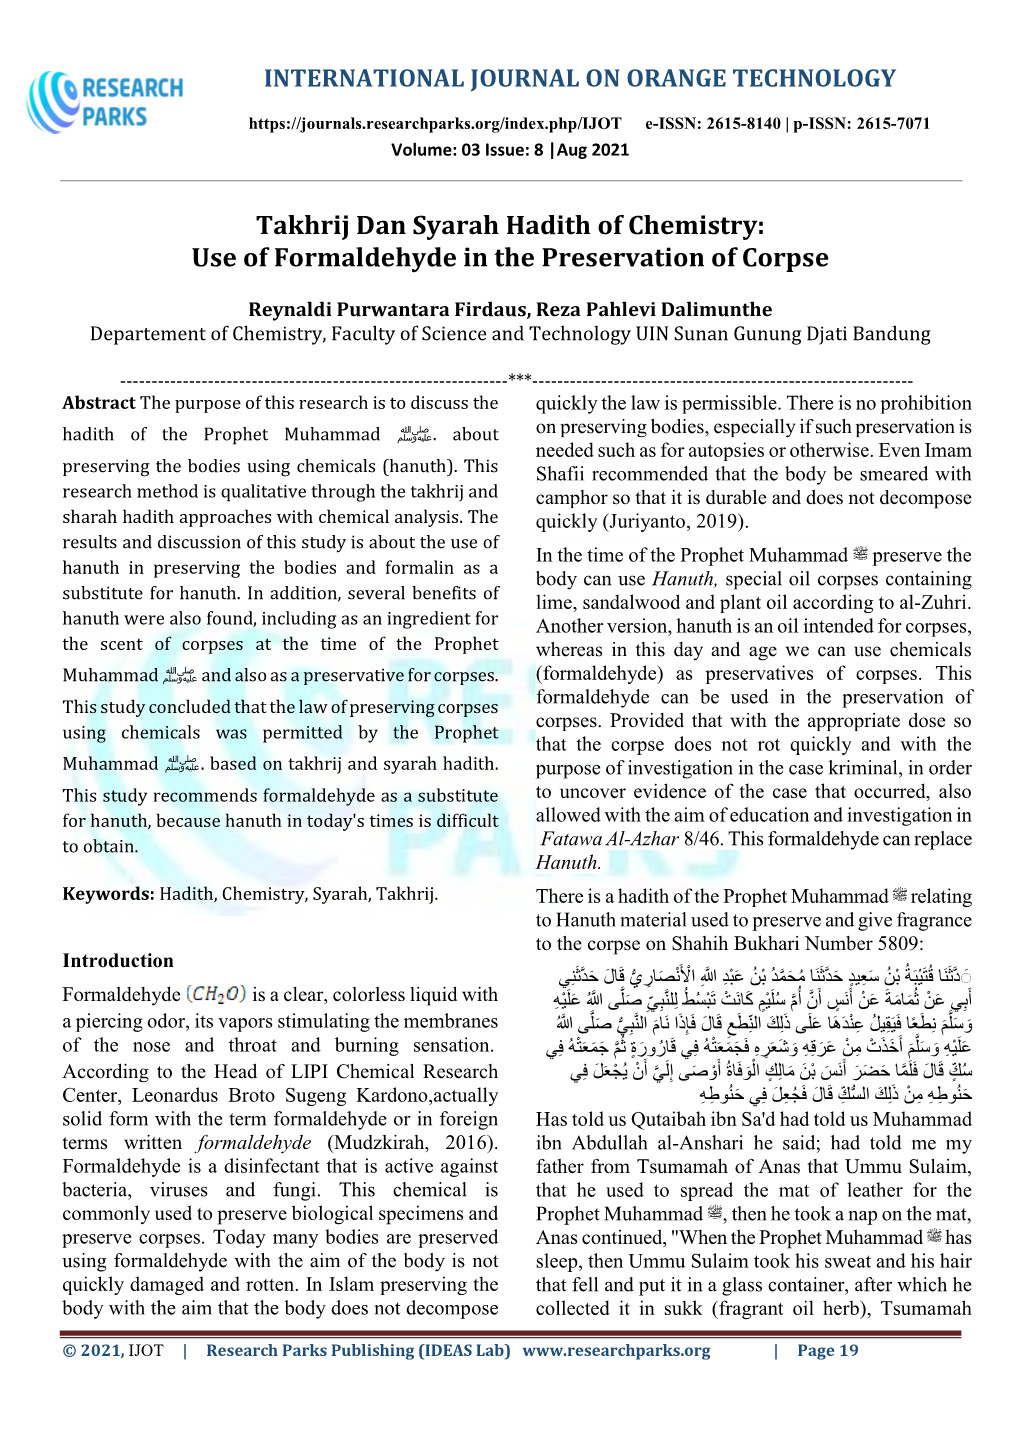 Takhrij Dan Syarah Hadith of Chemistry: Use of Formaldehyde in the Preservation of Corpse